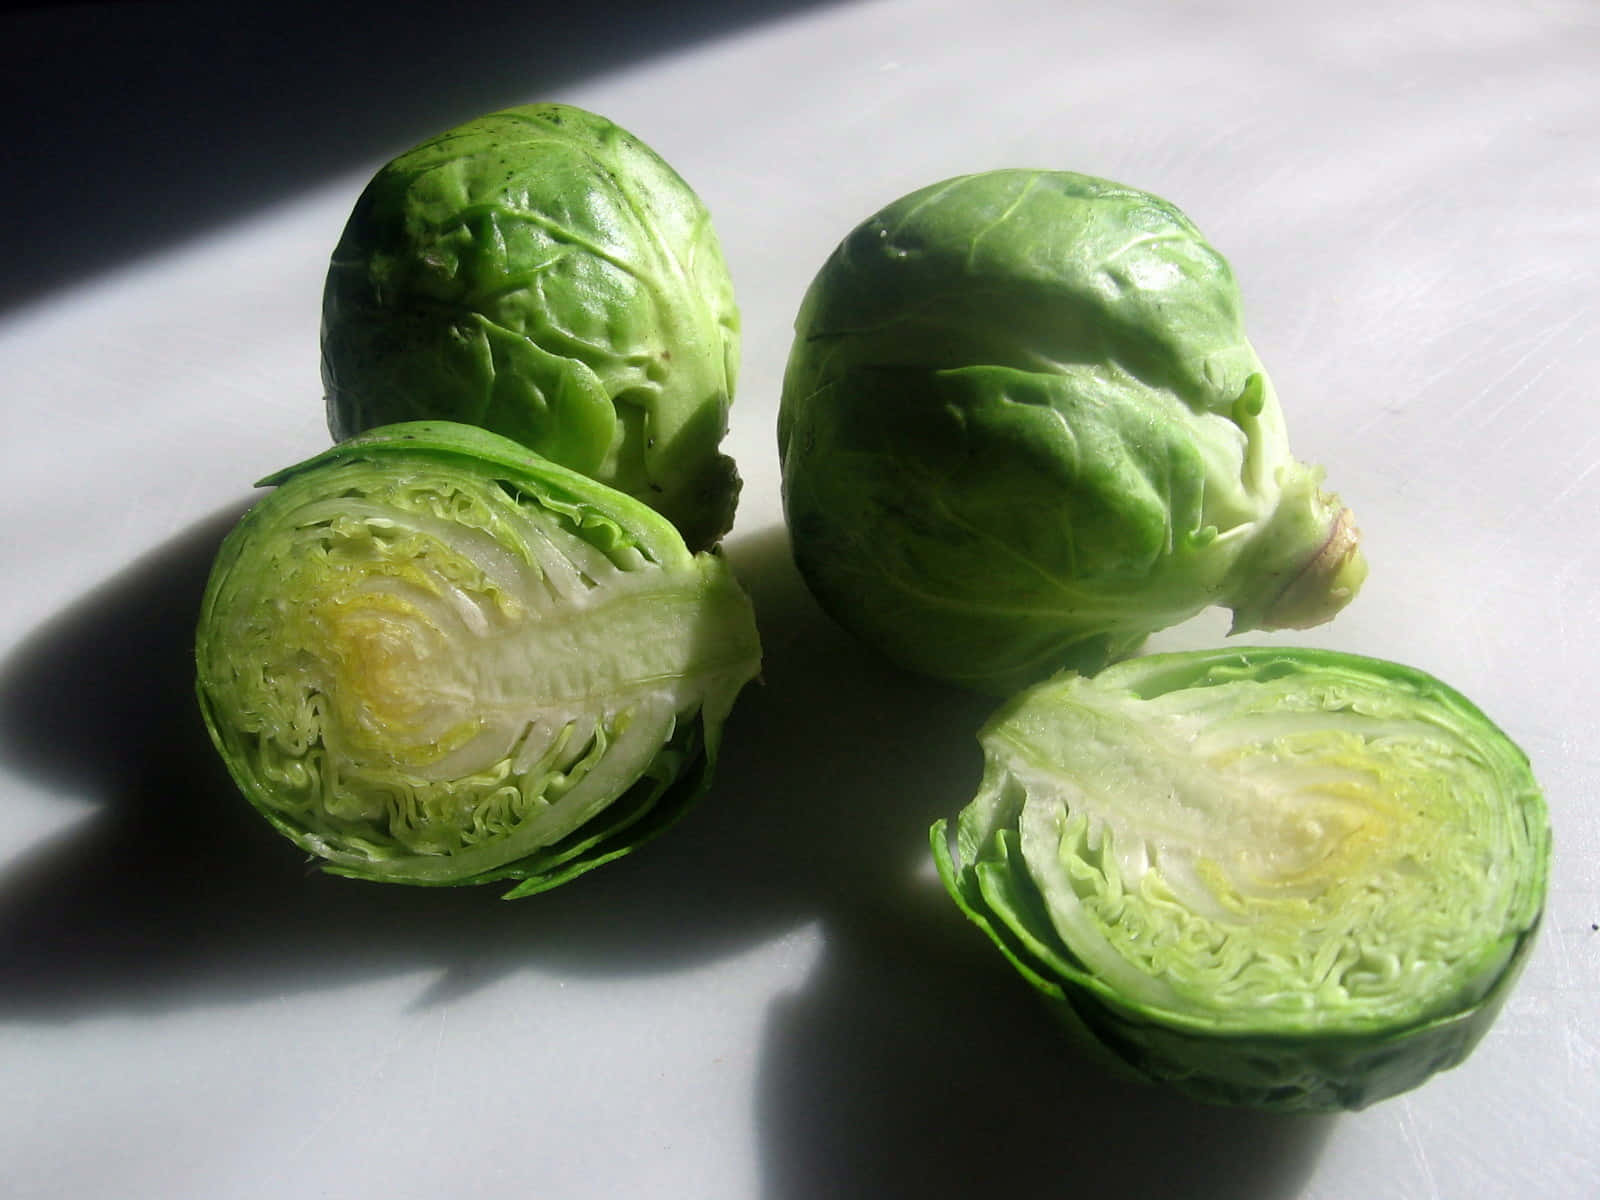 “A shining bowl of Brussel Sprouts”